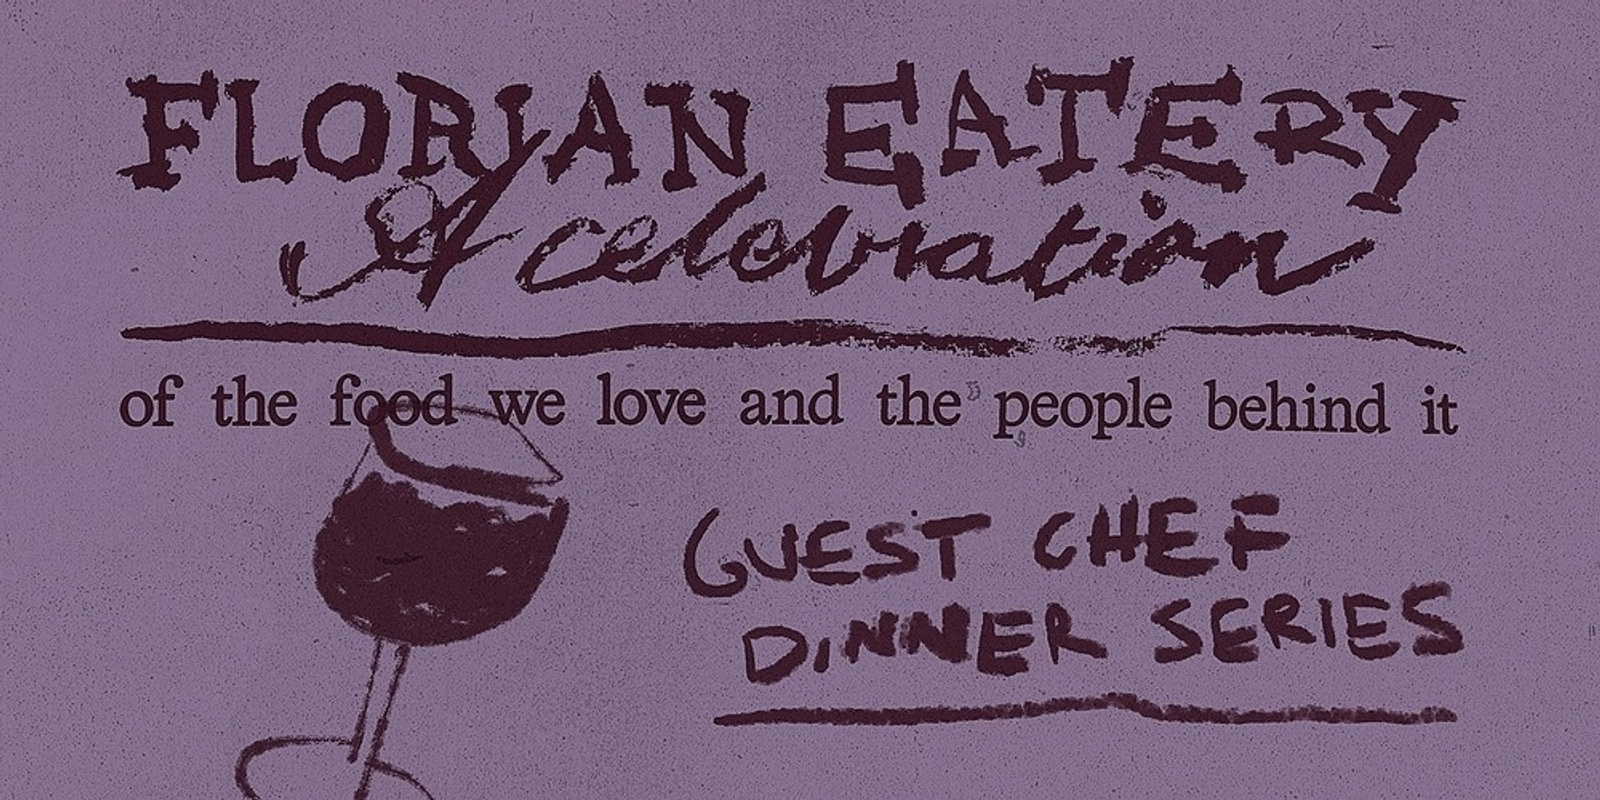 Banner image for Florian Eatery 'Guest Chef Dinner Series' - Alison Biro